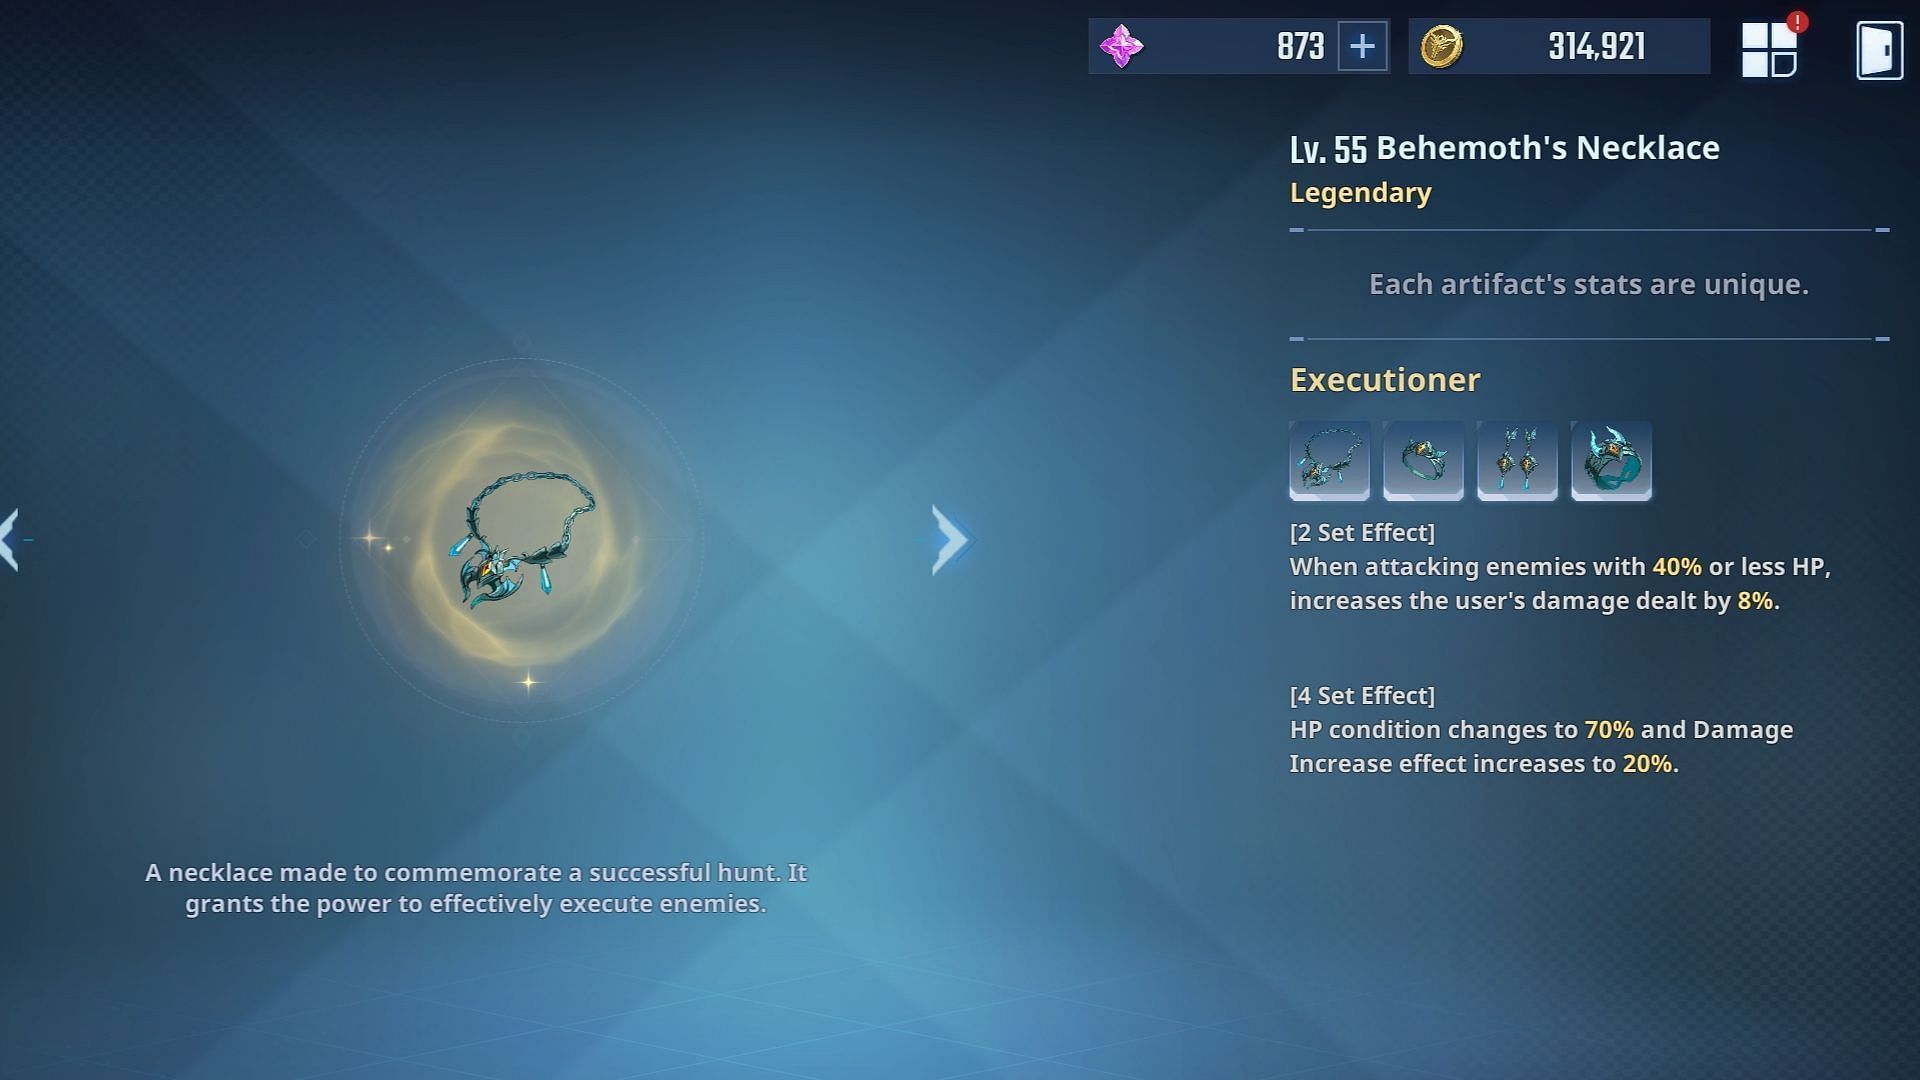 Executioner artifact in Solo Leveling Arise. (Image via Netmarble)